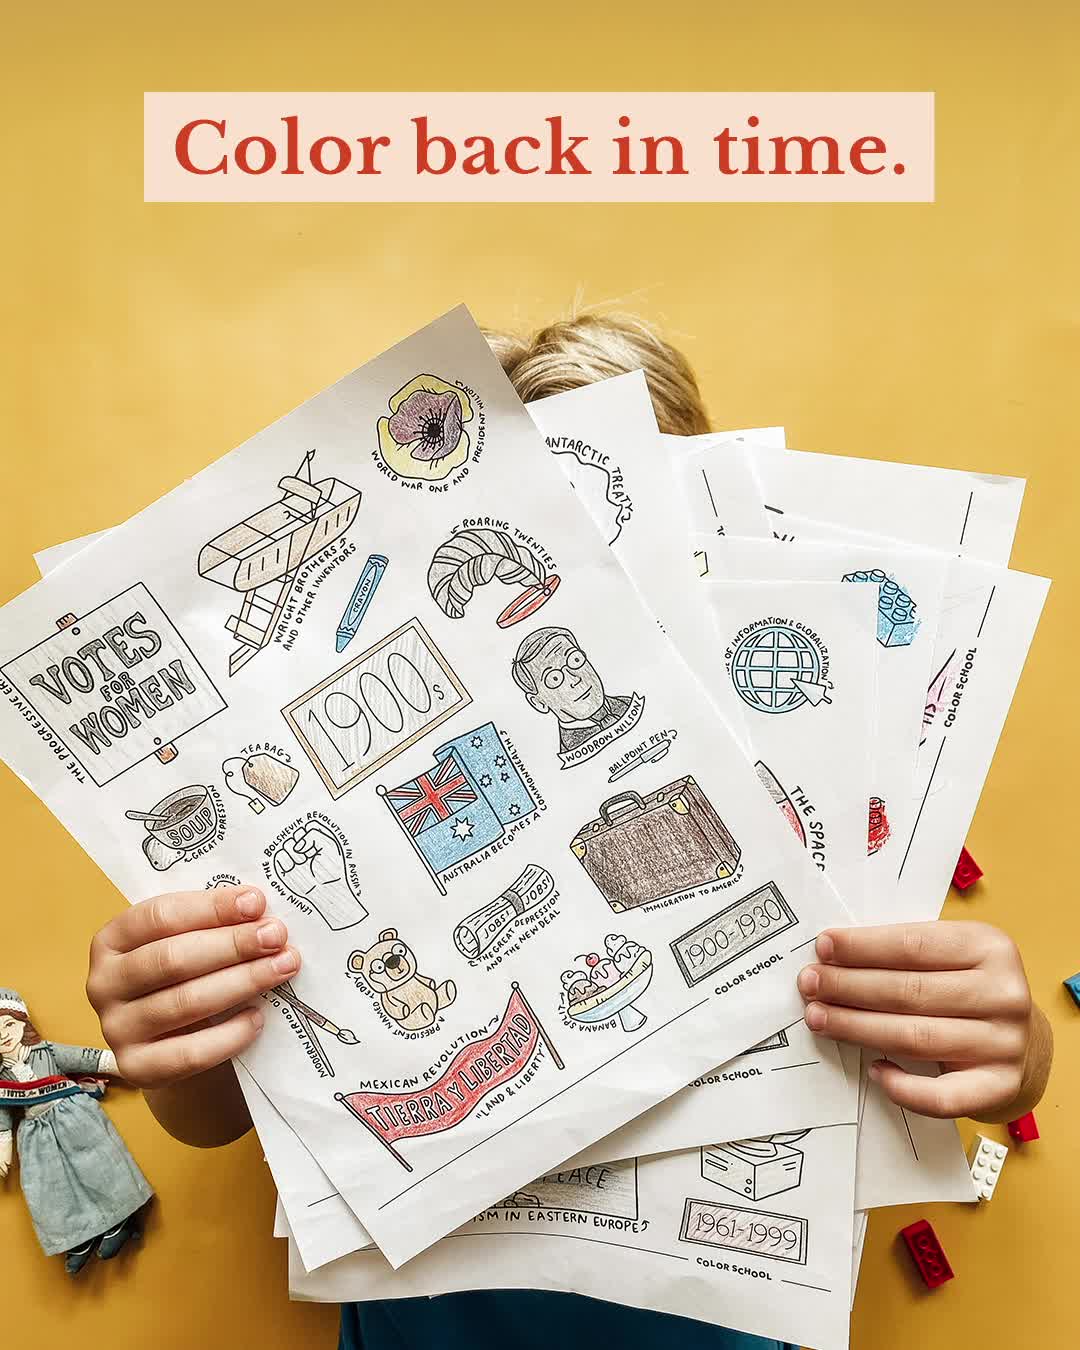 get_the_best_Coloring Sheets_ad